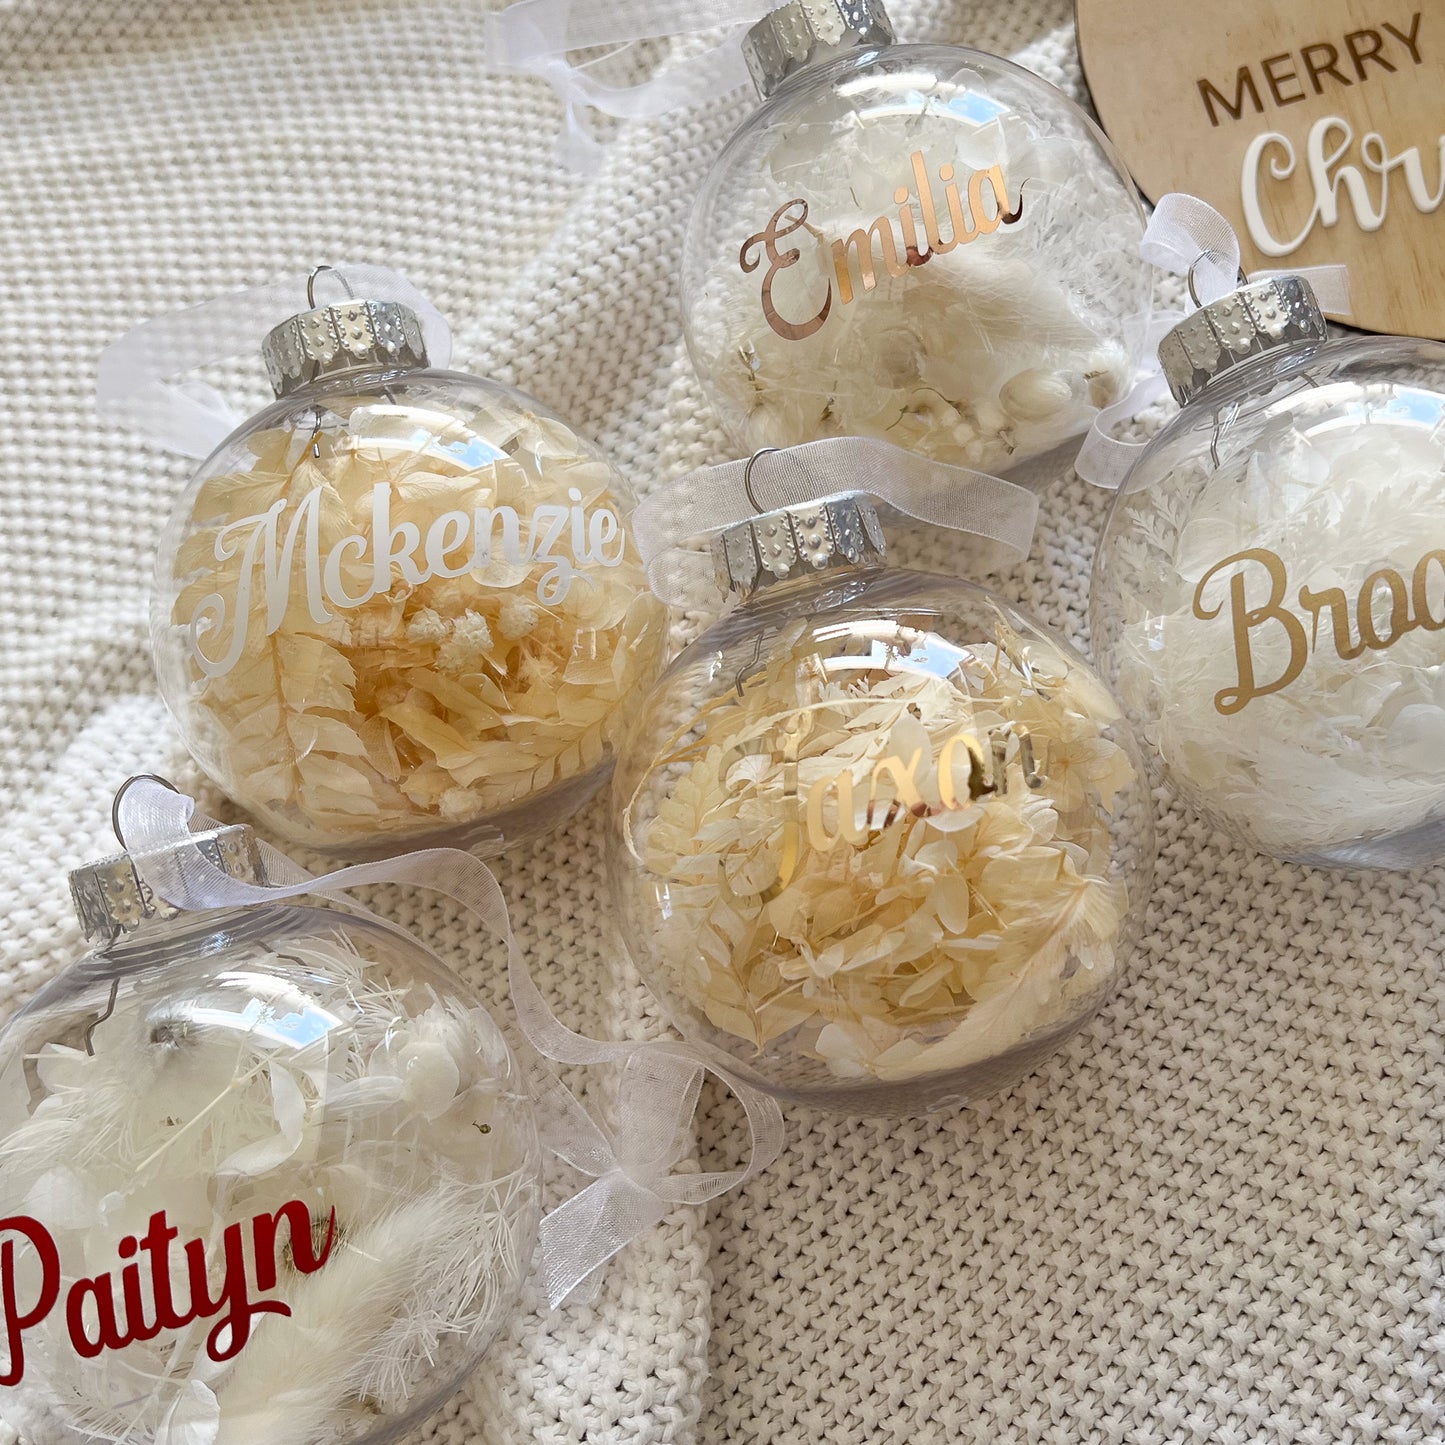 Personalised Dried Floral Christmas Bauble